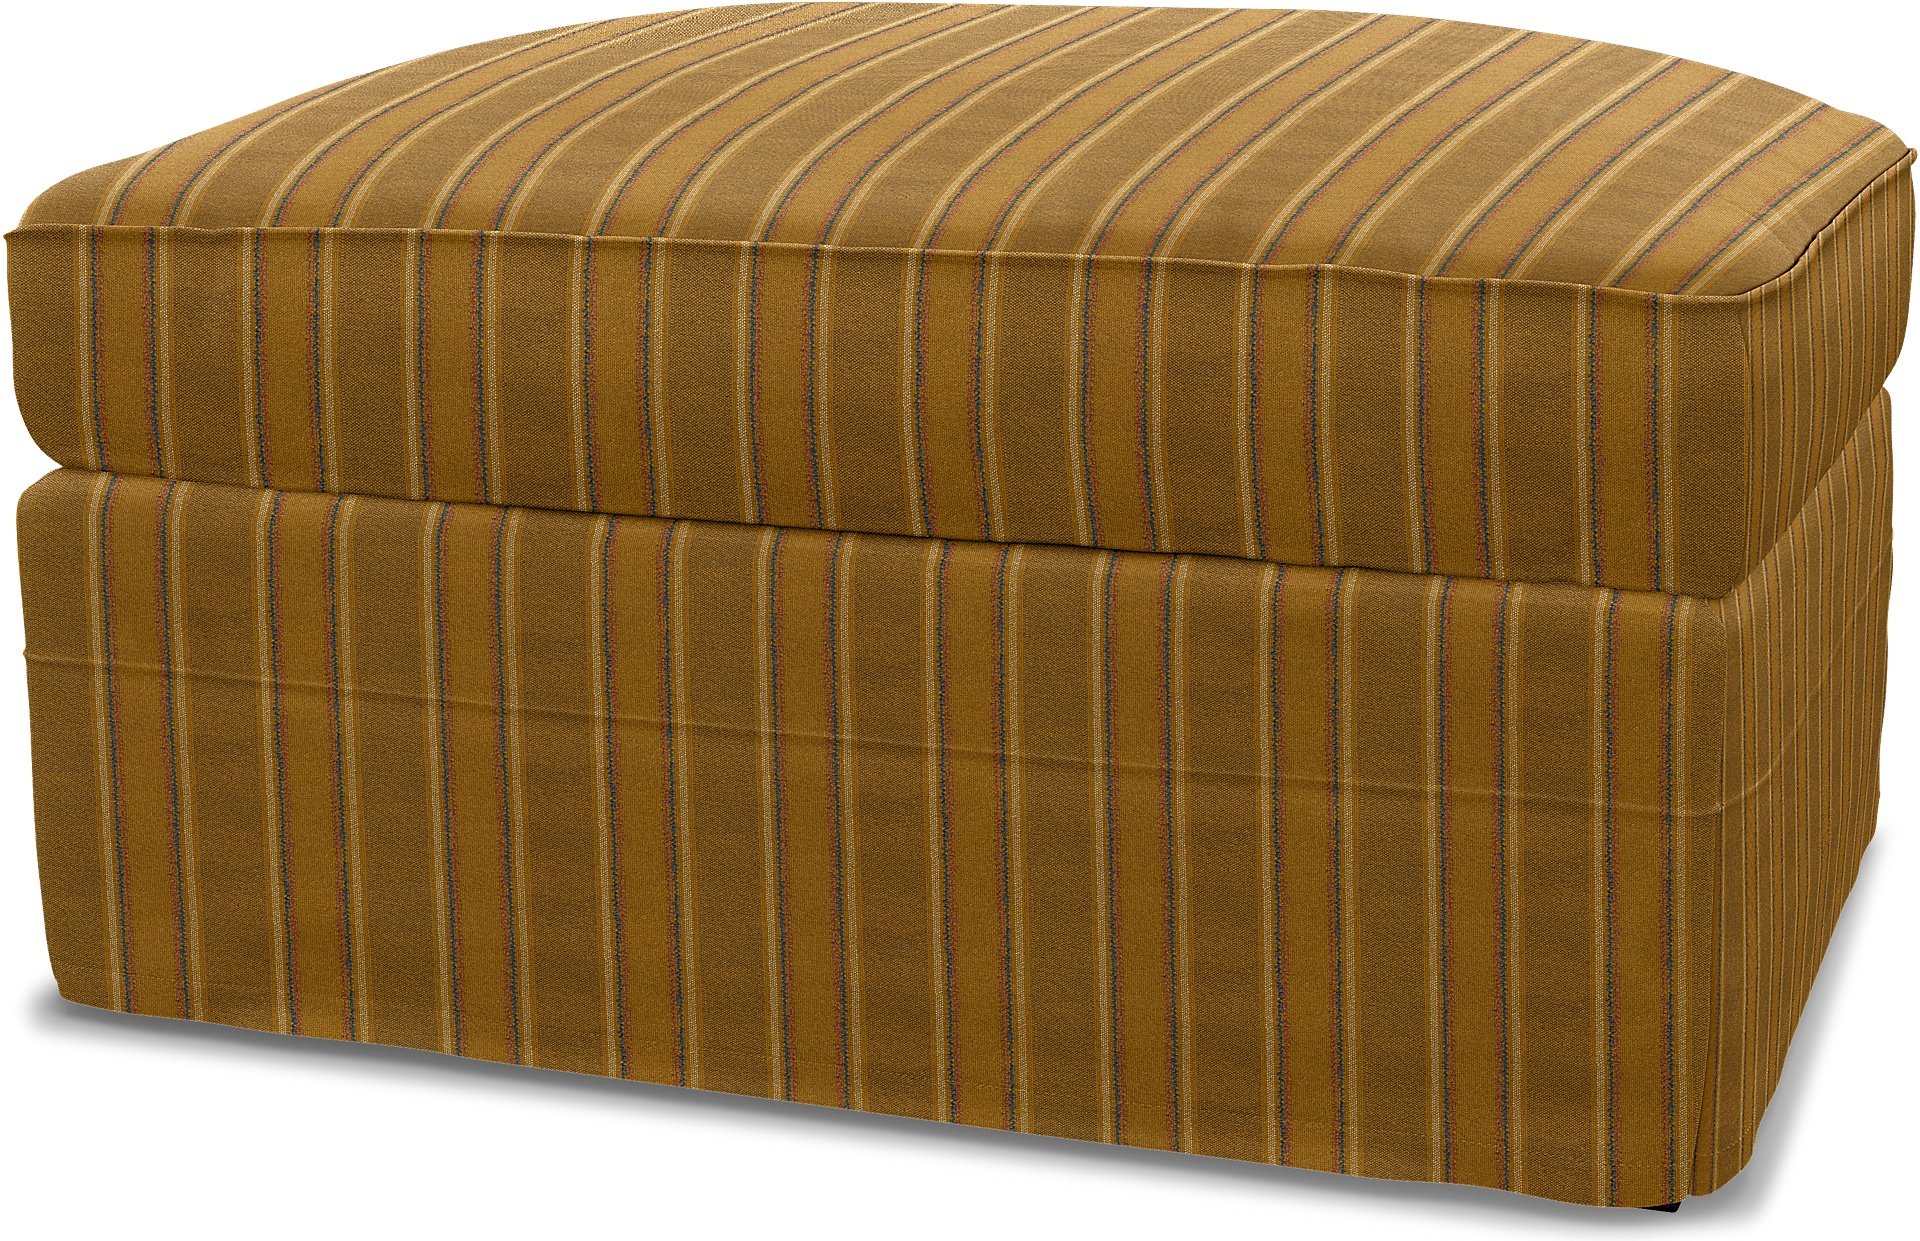 IKEA - Gronlid Footstool with Storage Cover, Mustard Stripe, Cotton - Bemz